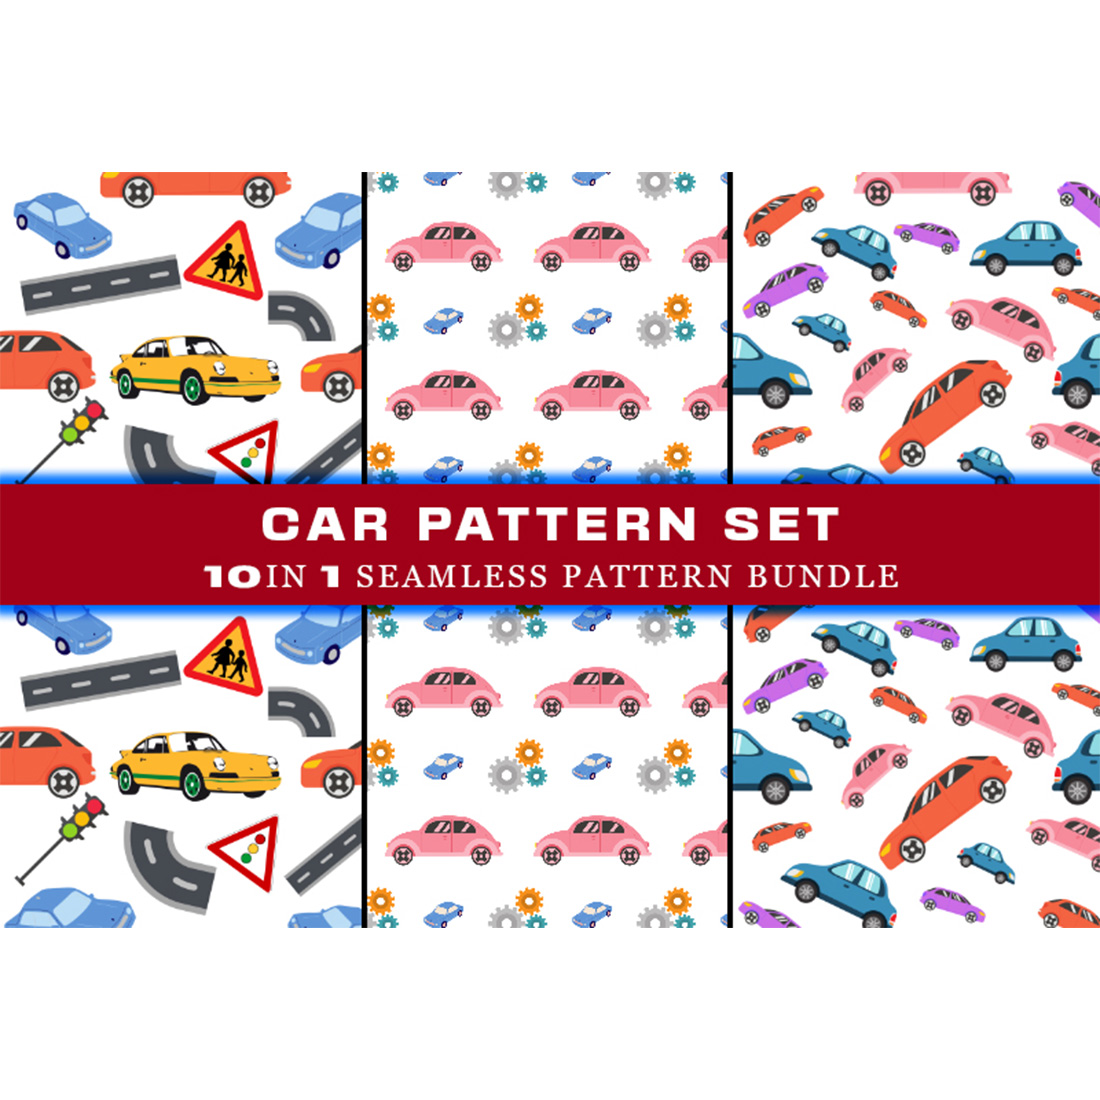 Car Seamless Pattern Digital Papers V.3 main cover.